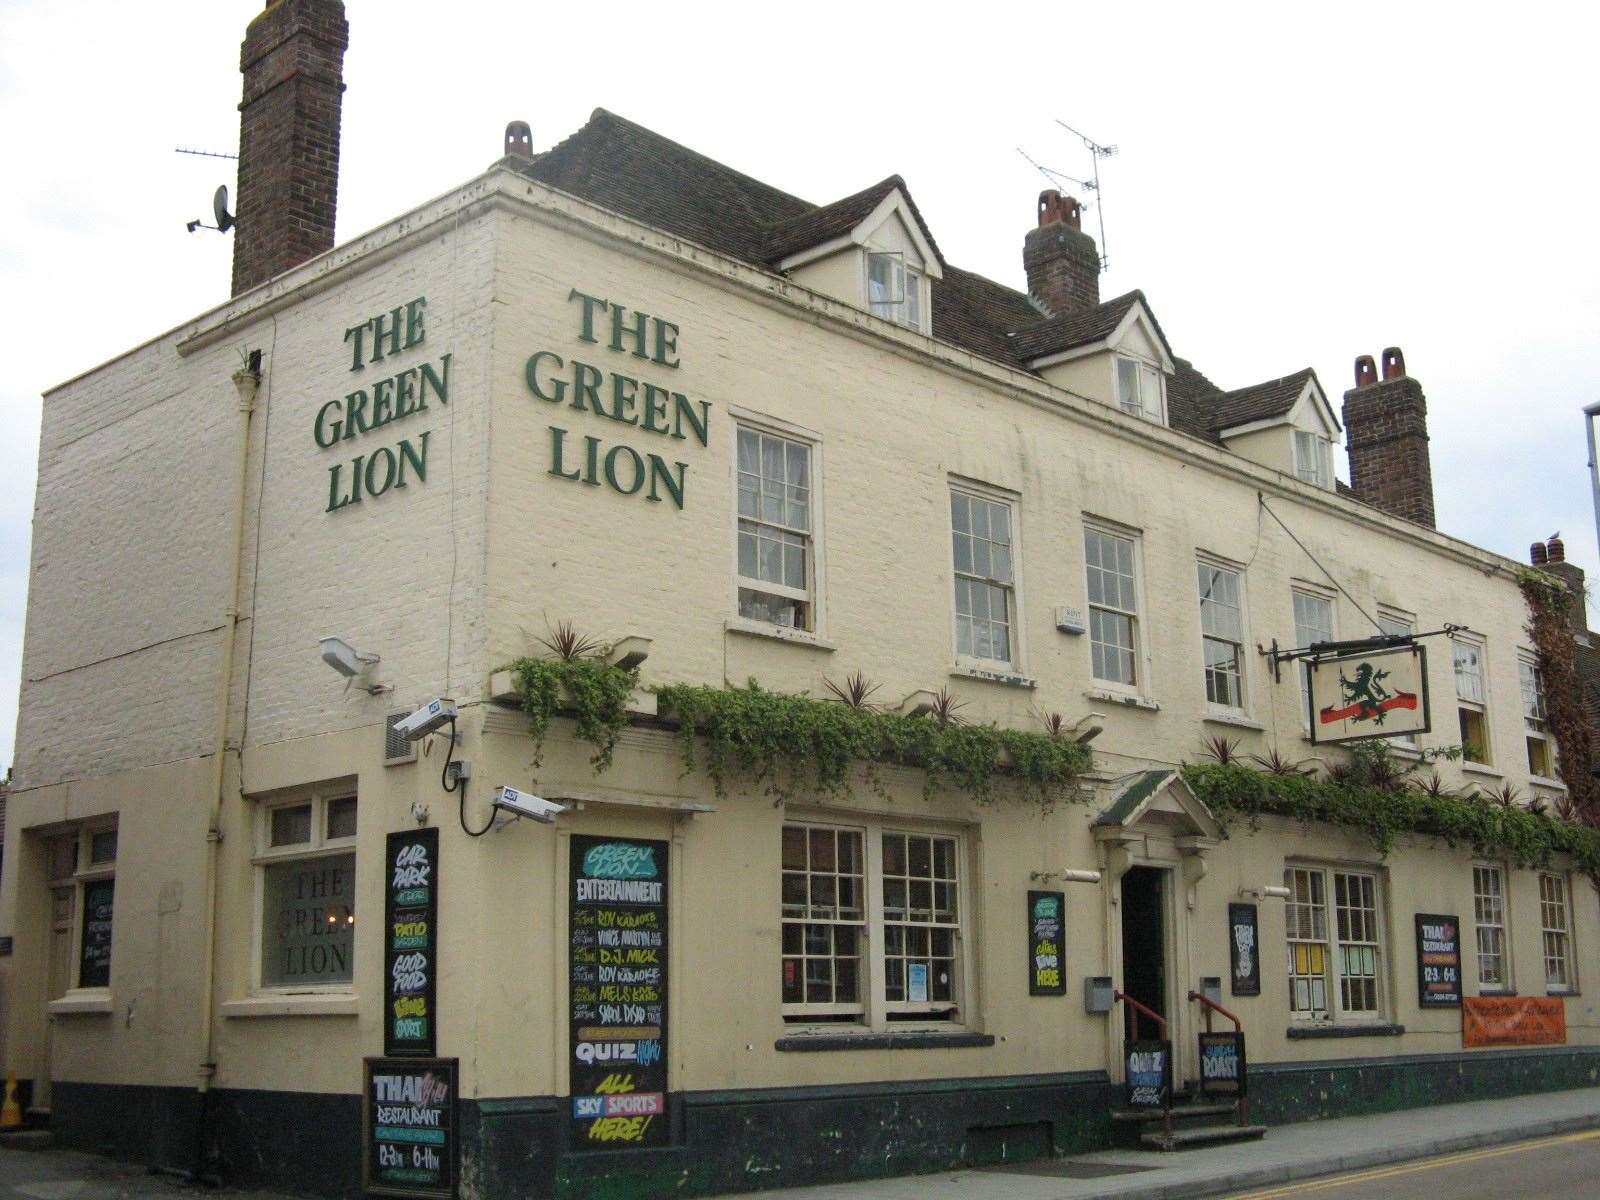 The Green Lion pub in 2008